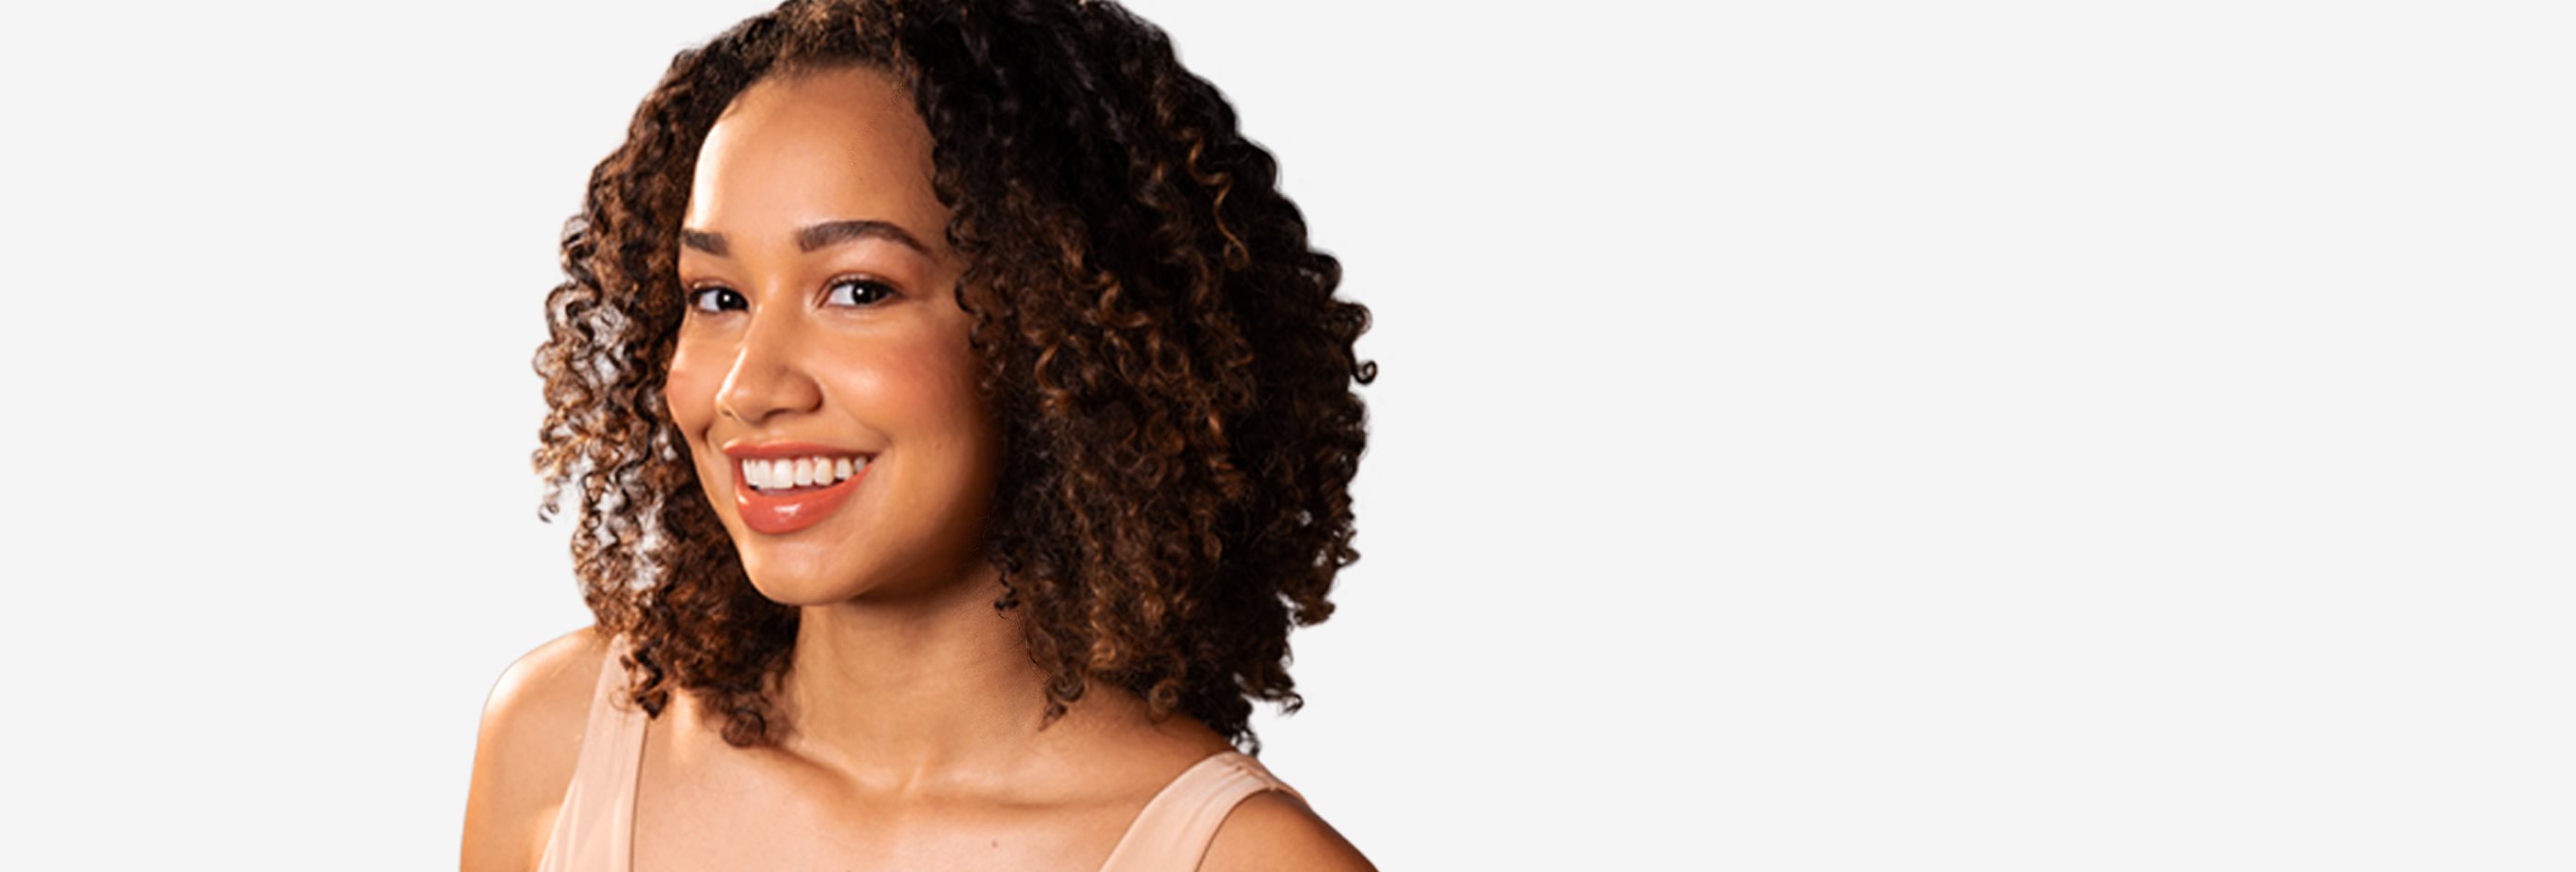 View of a person with brown curly hair smiling against a white background.